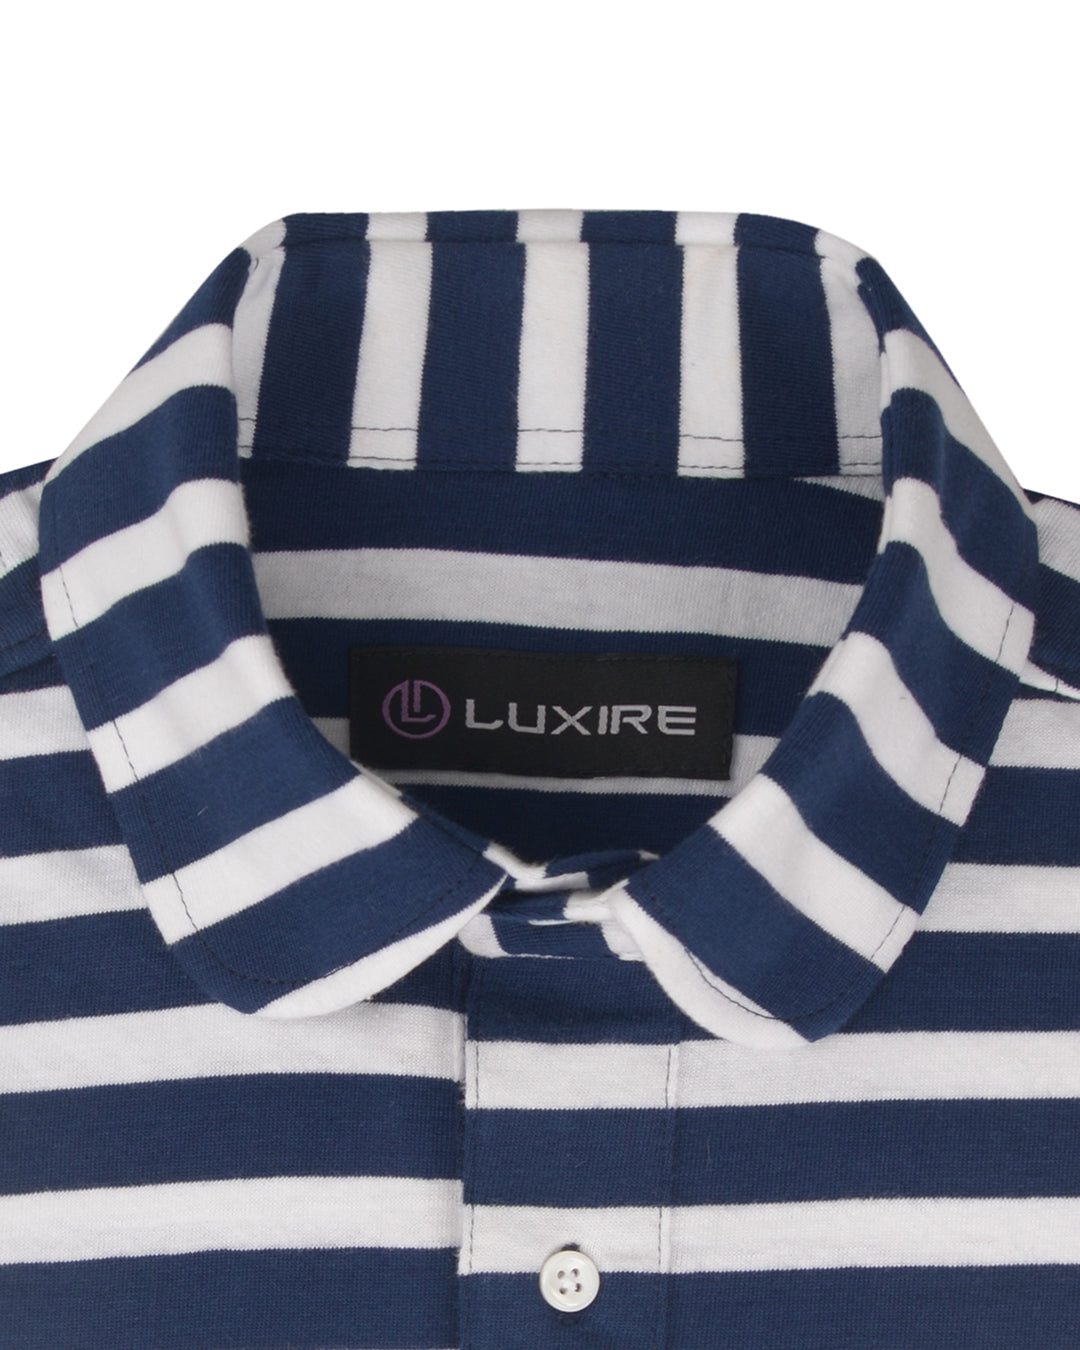 Collar of the custom oxford polo shirt for men by Luxire in colbalt blue and white stripes